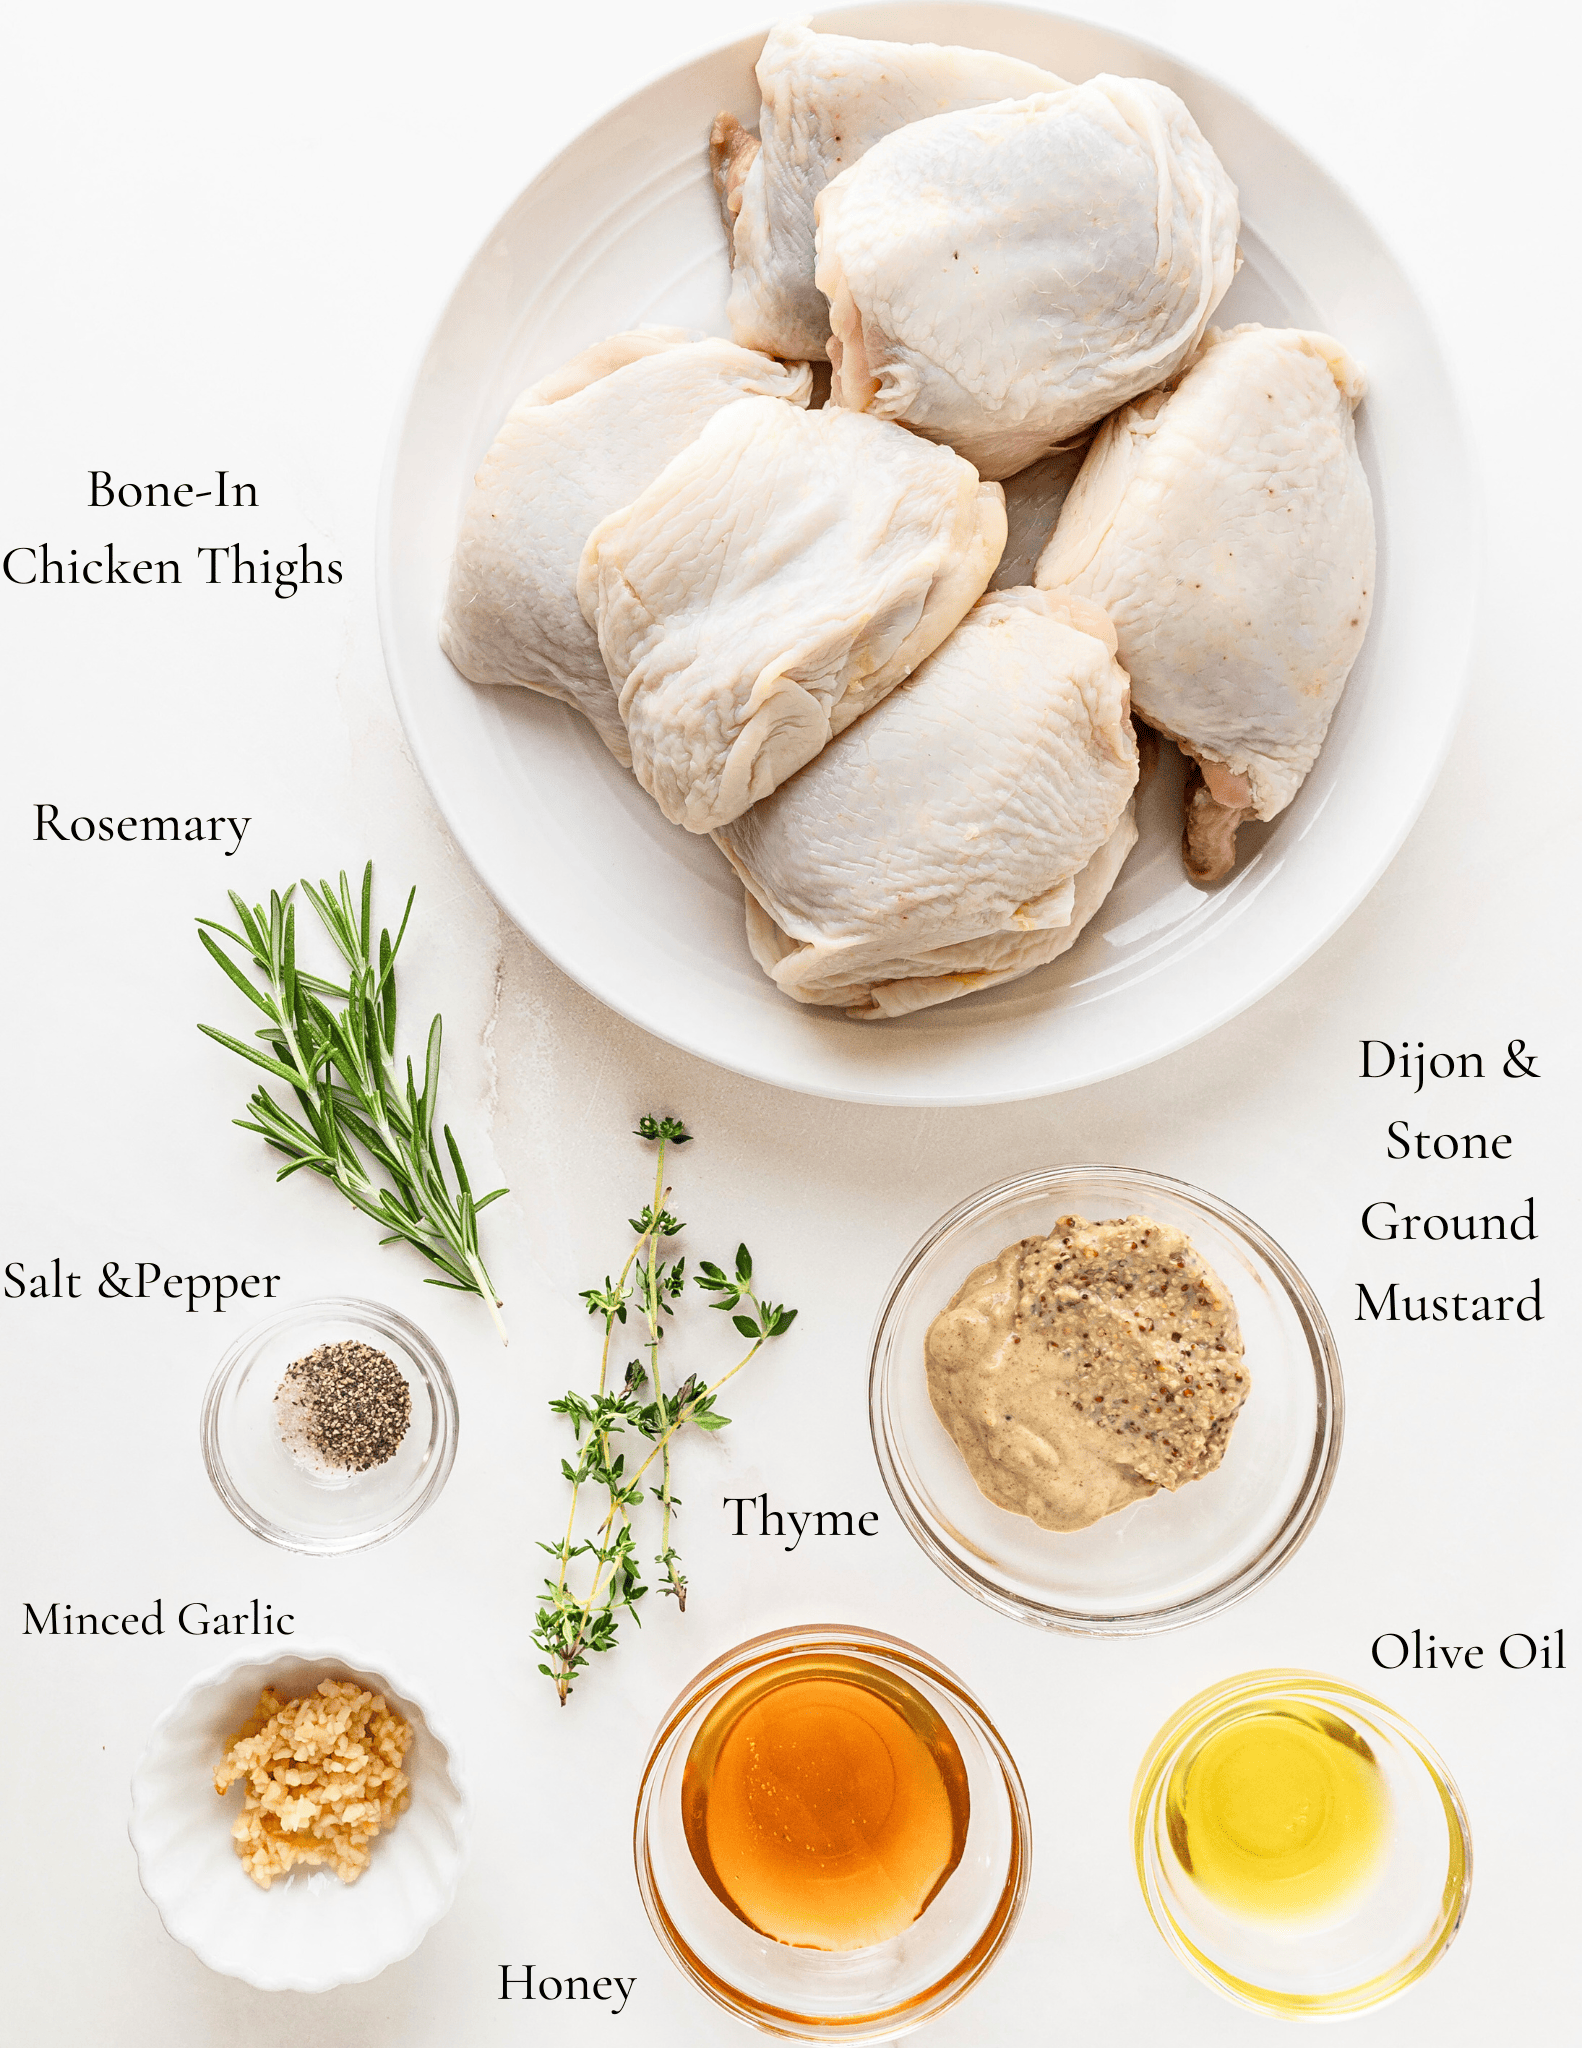 Ingredients for dijon mustard chicken. A plate of bone-in chicken thighs next to fresh thyme, rosemary, dijon mustard, stone ground mustard, salt, pepper, olive oil, honey, and minced garlic. 